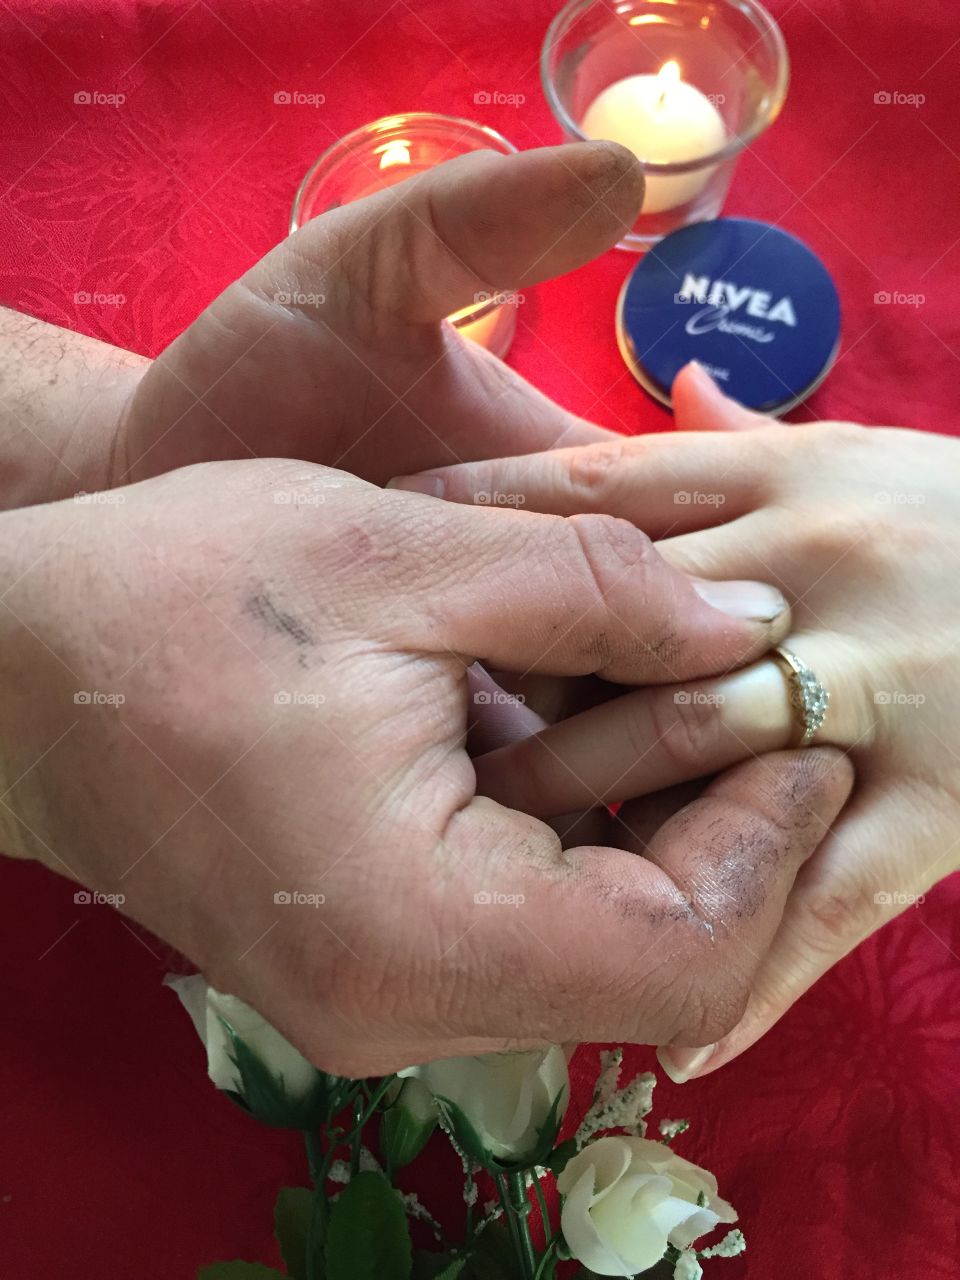 Man love Nivea cream to Softens those hard-working hands as he takes the hand of his true love